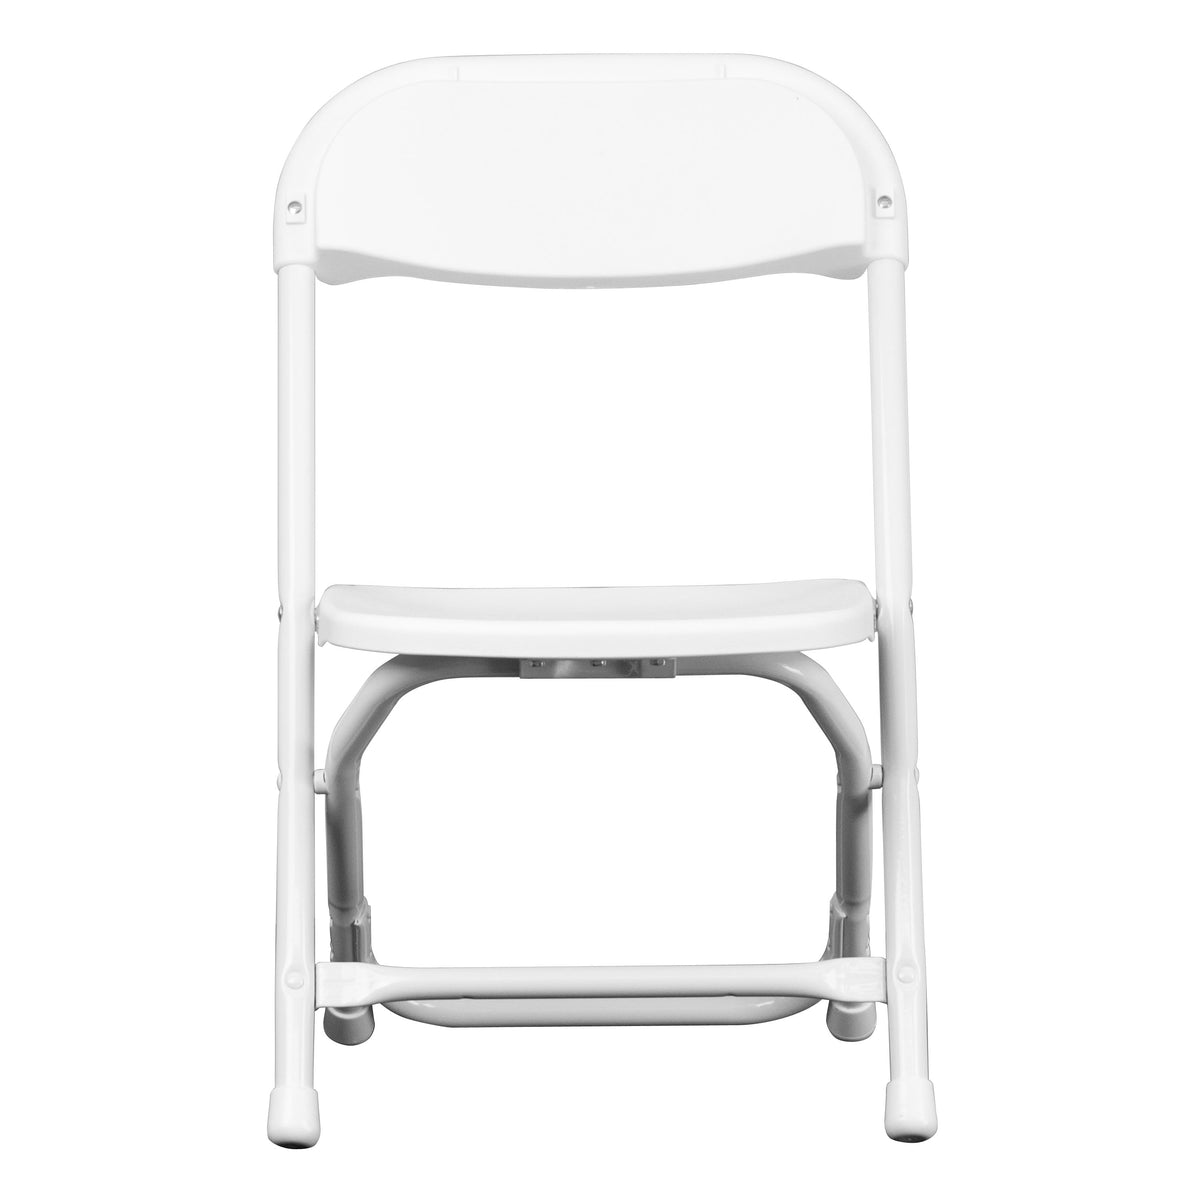 White |#| Kids White Plastic Folding Chair with Textured Seat - Preschool Seating